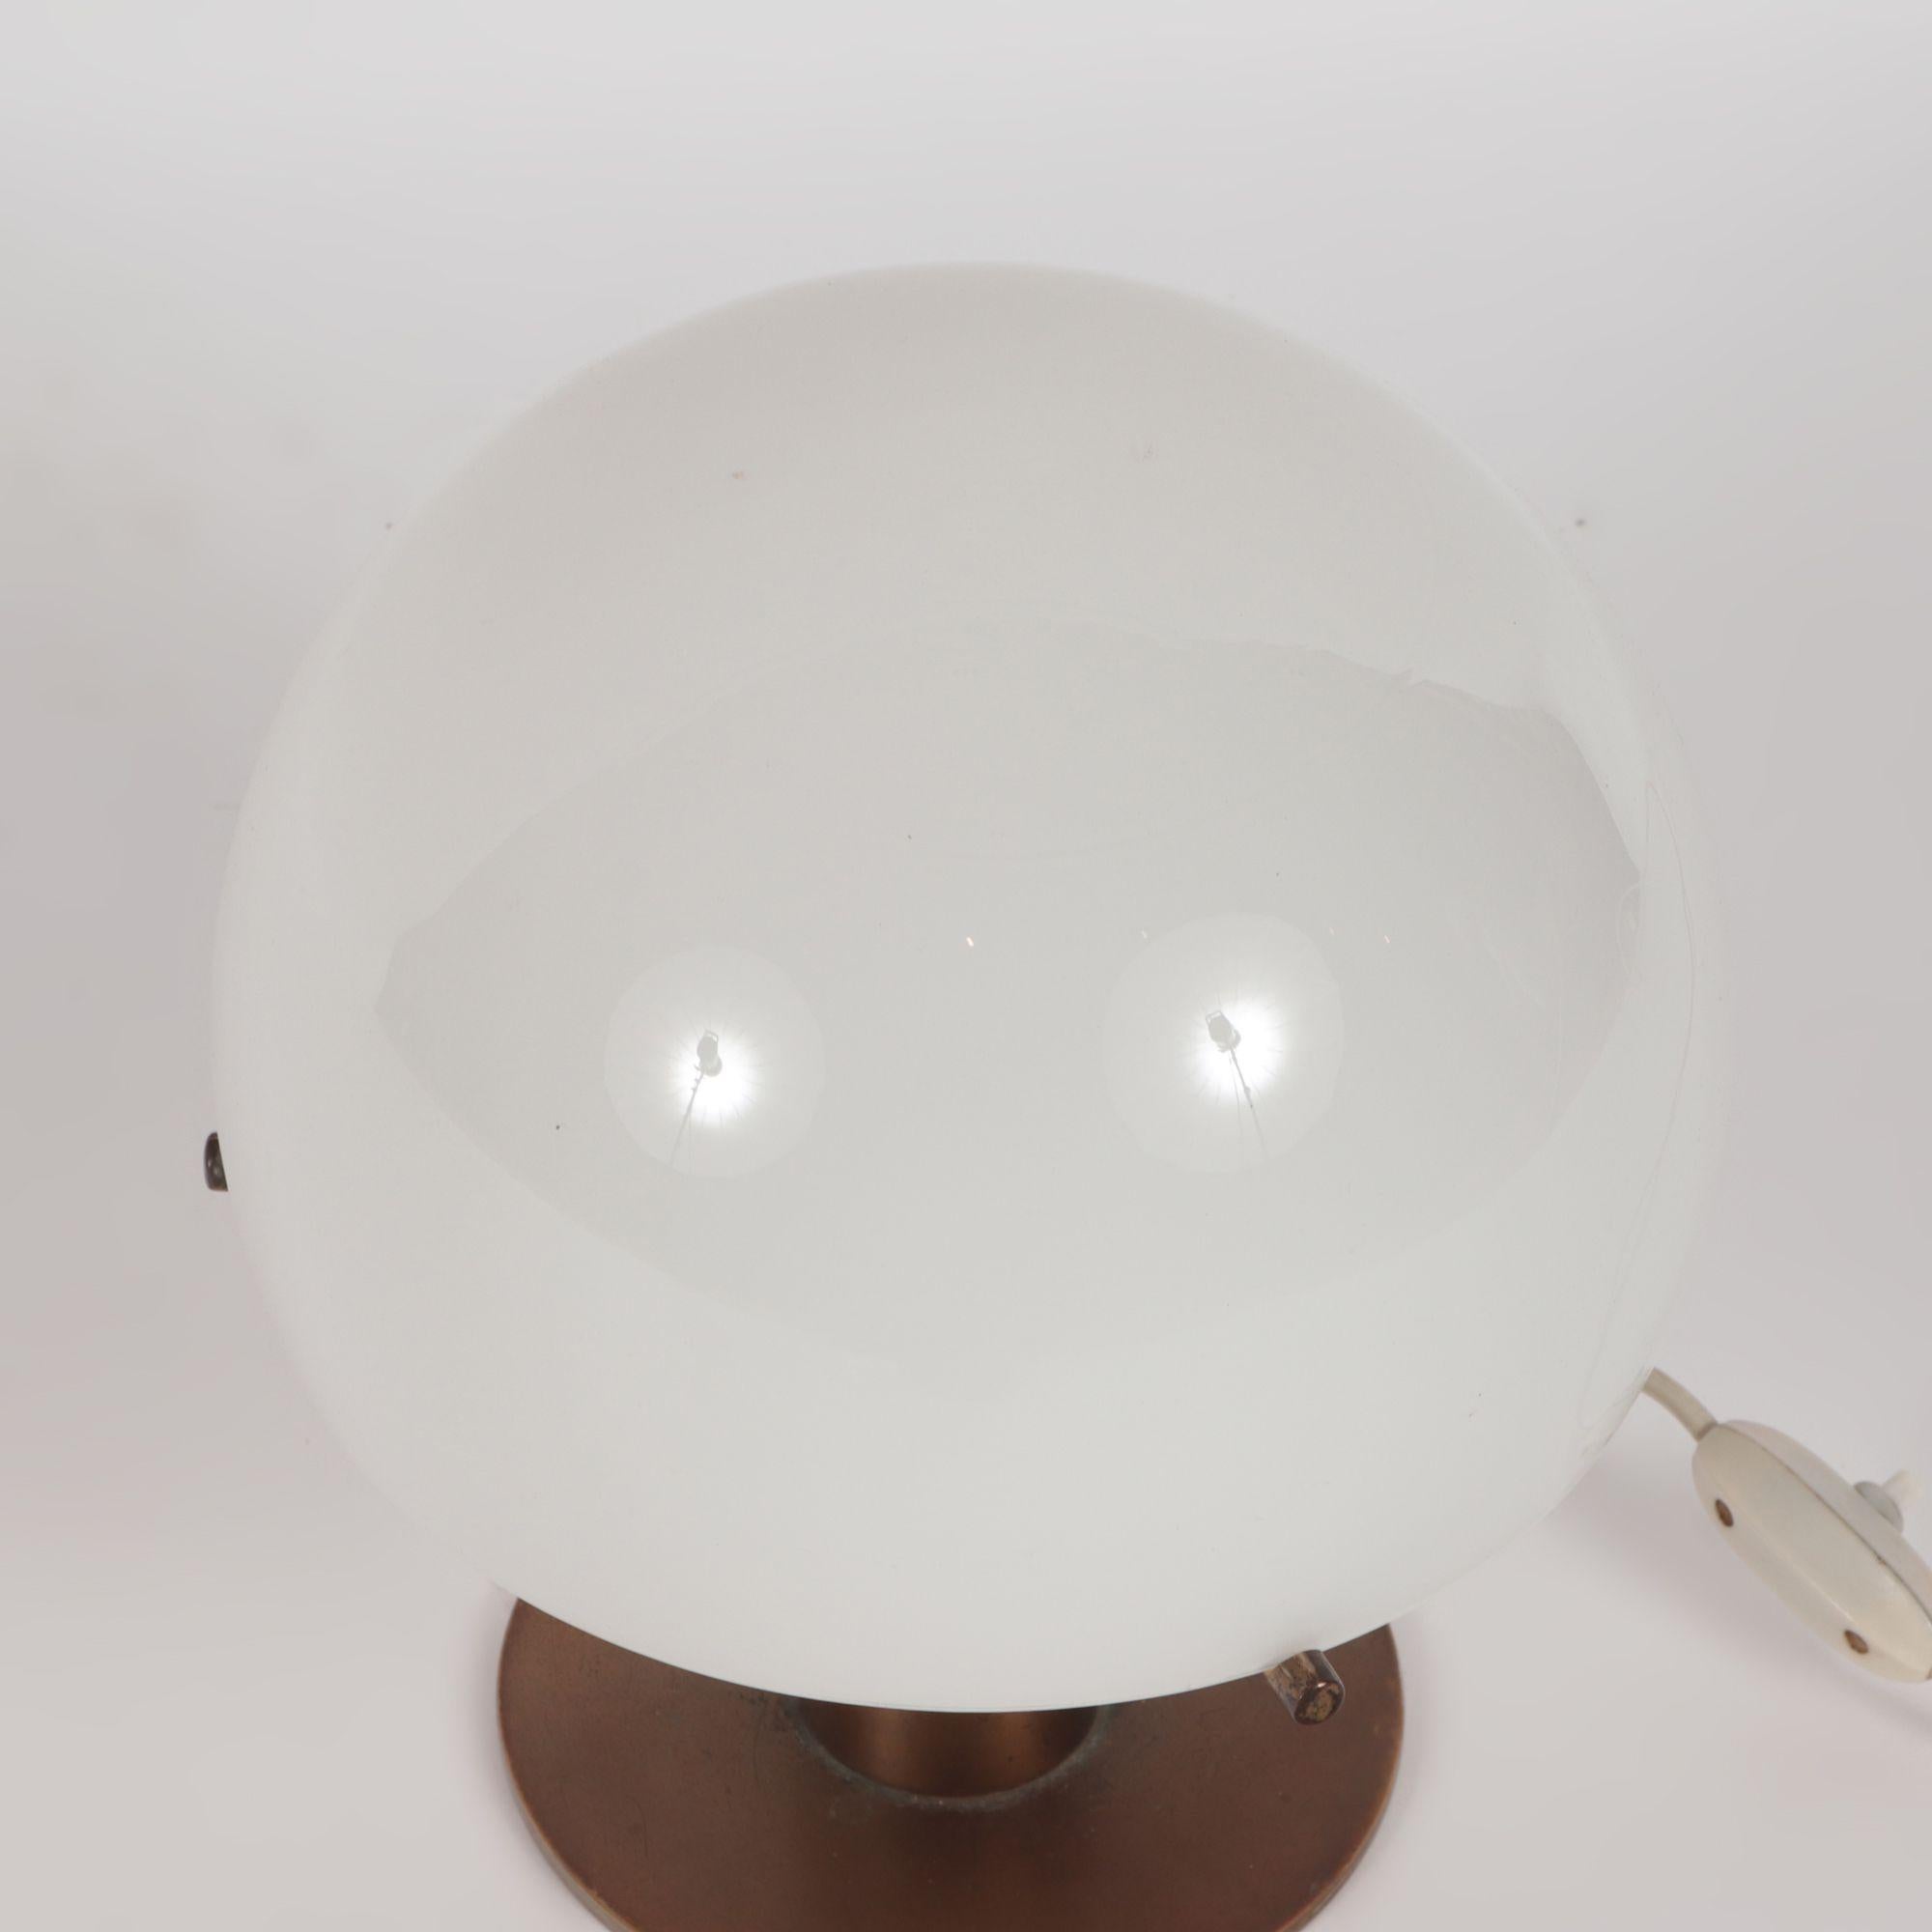 An Italian Mid-Century Modern brass and glass mushroom from table lamp, circa 1950. Needs to be rewired for use in the US.